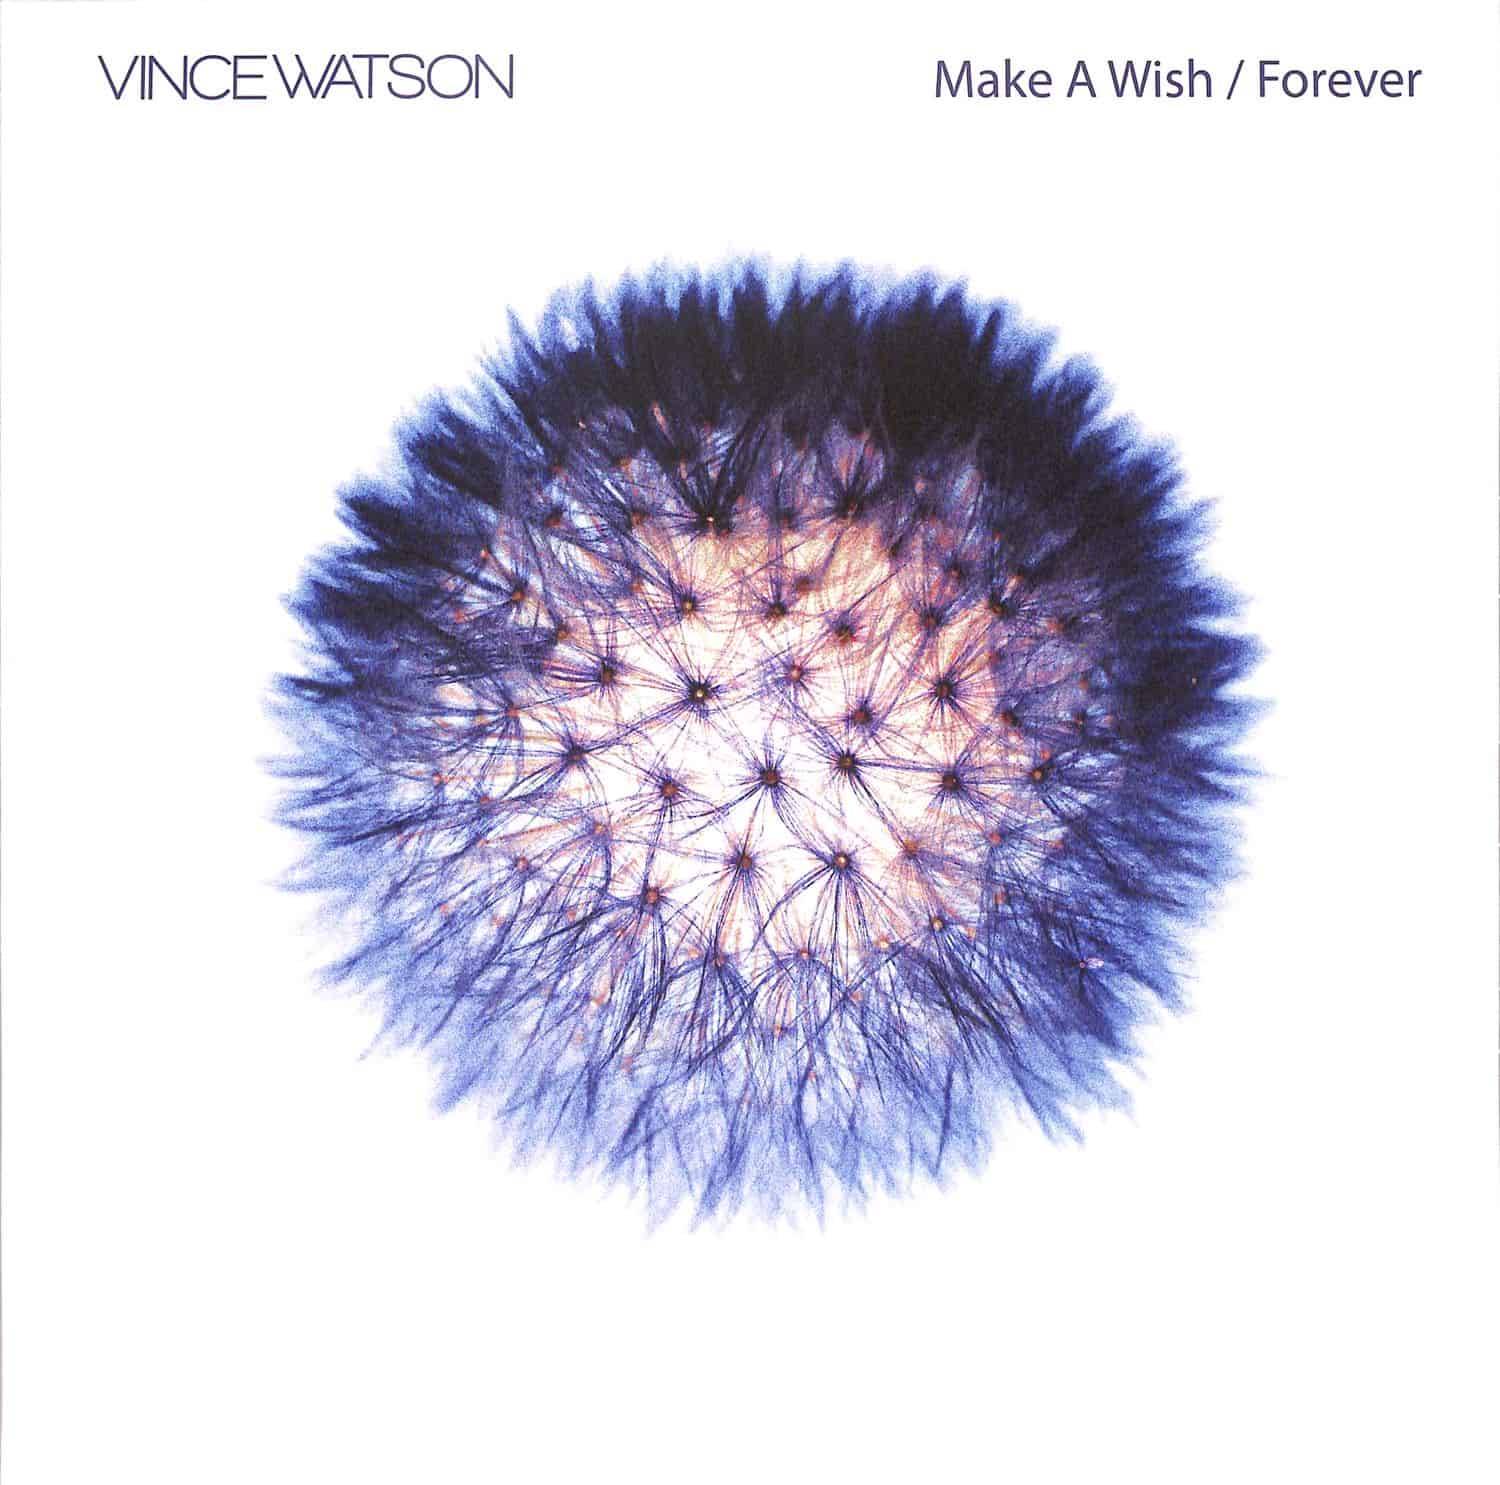 Vince Watson - MAKE A WISH / FOREVER